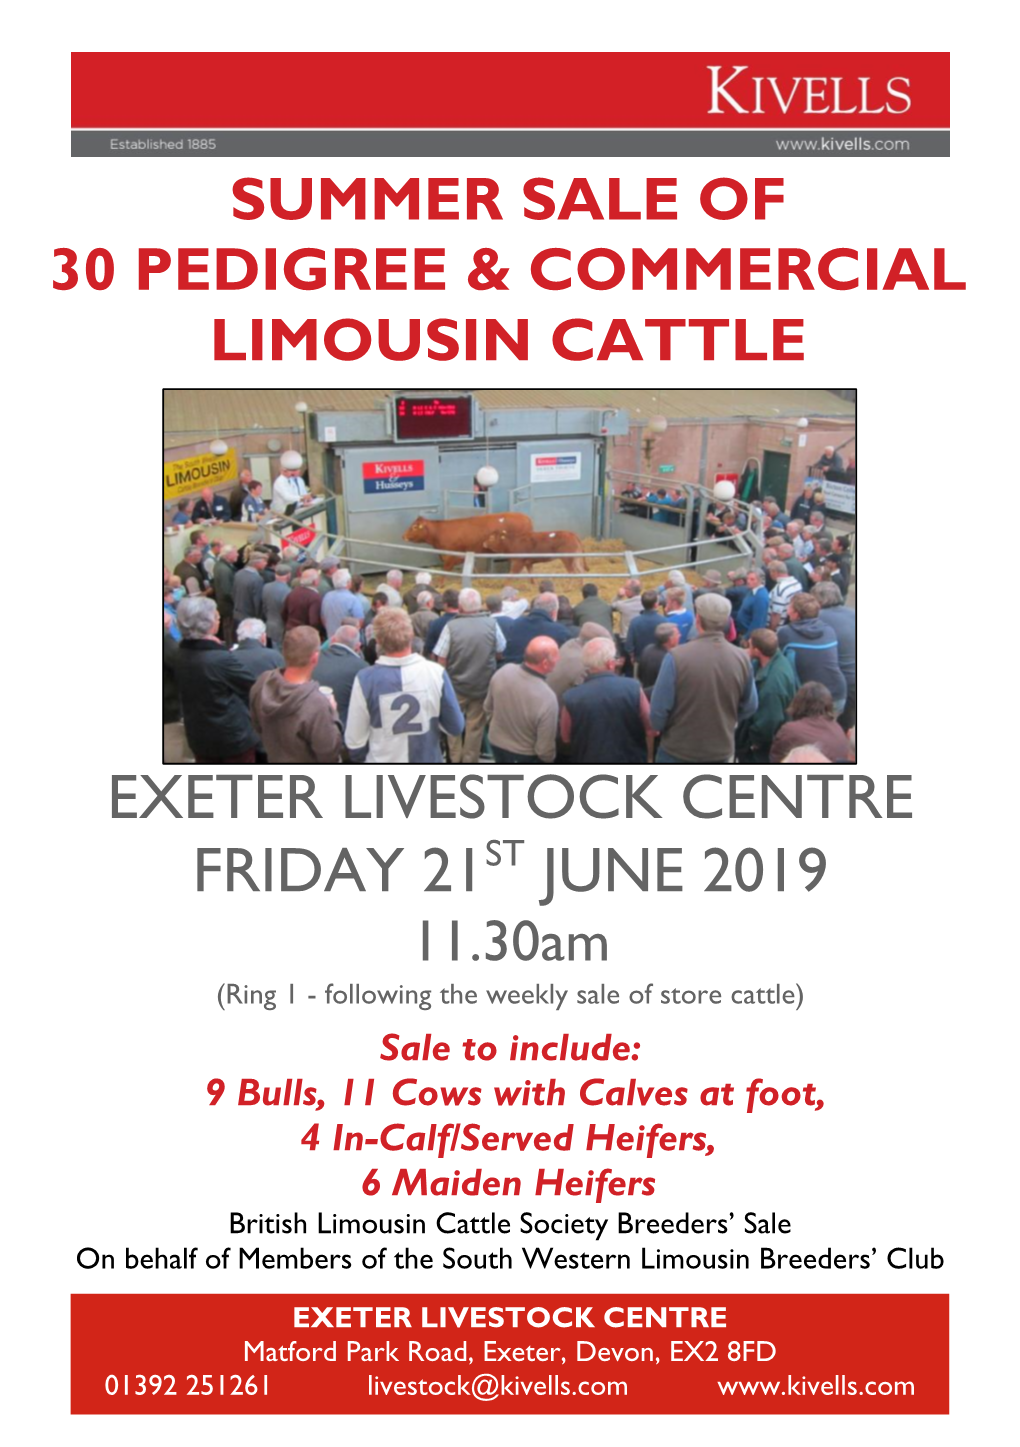 EXETER LIVESTOCK CENTRE FRIDAY 21ST JUNE 2019 11.30Am (Ring 1 - Following the Weekly Sale of Store Cattle)